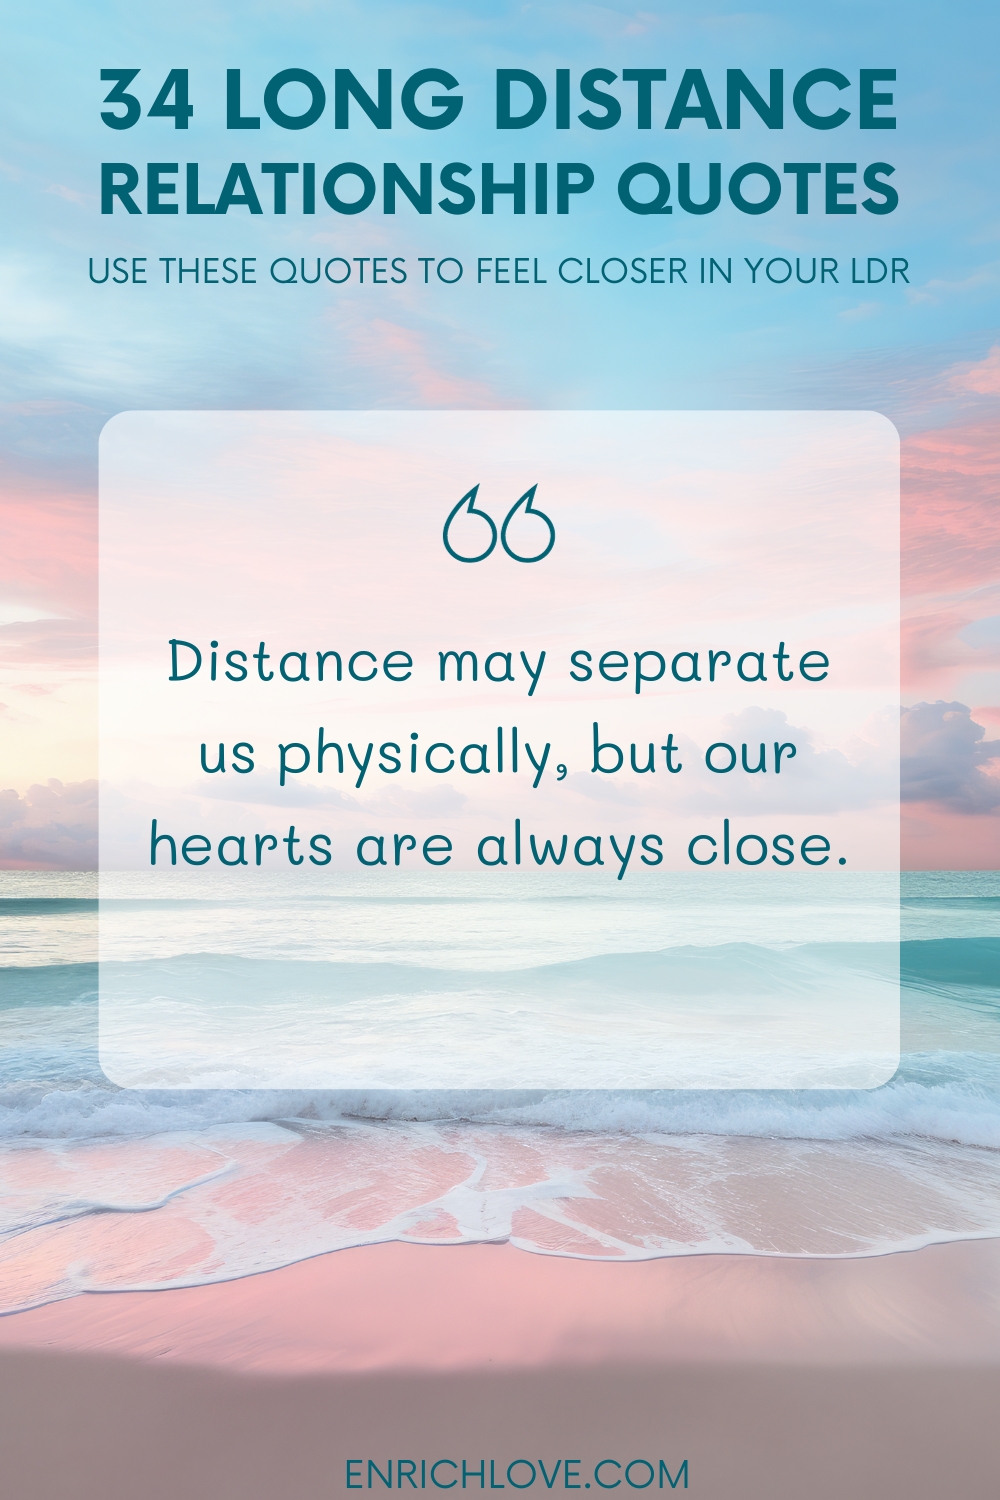 34 Long Distance Relationship Quotes - Distance may separate us physically, but our hearts are always close.